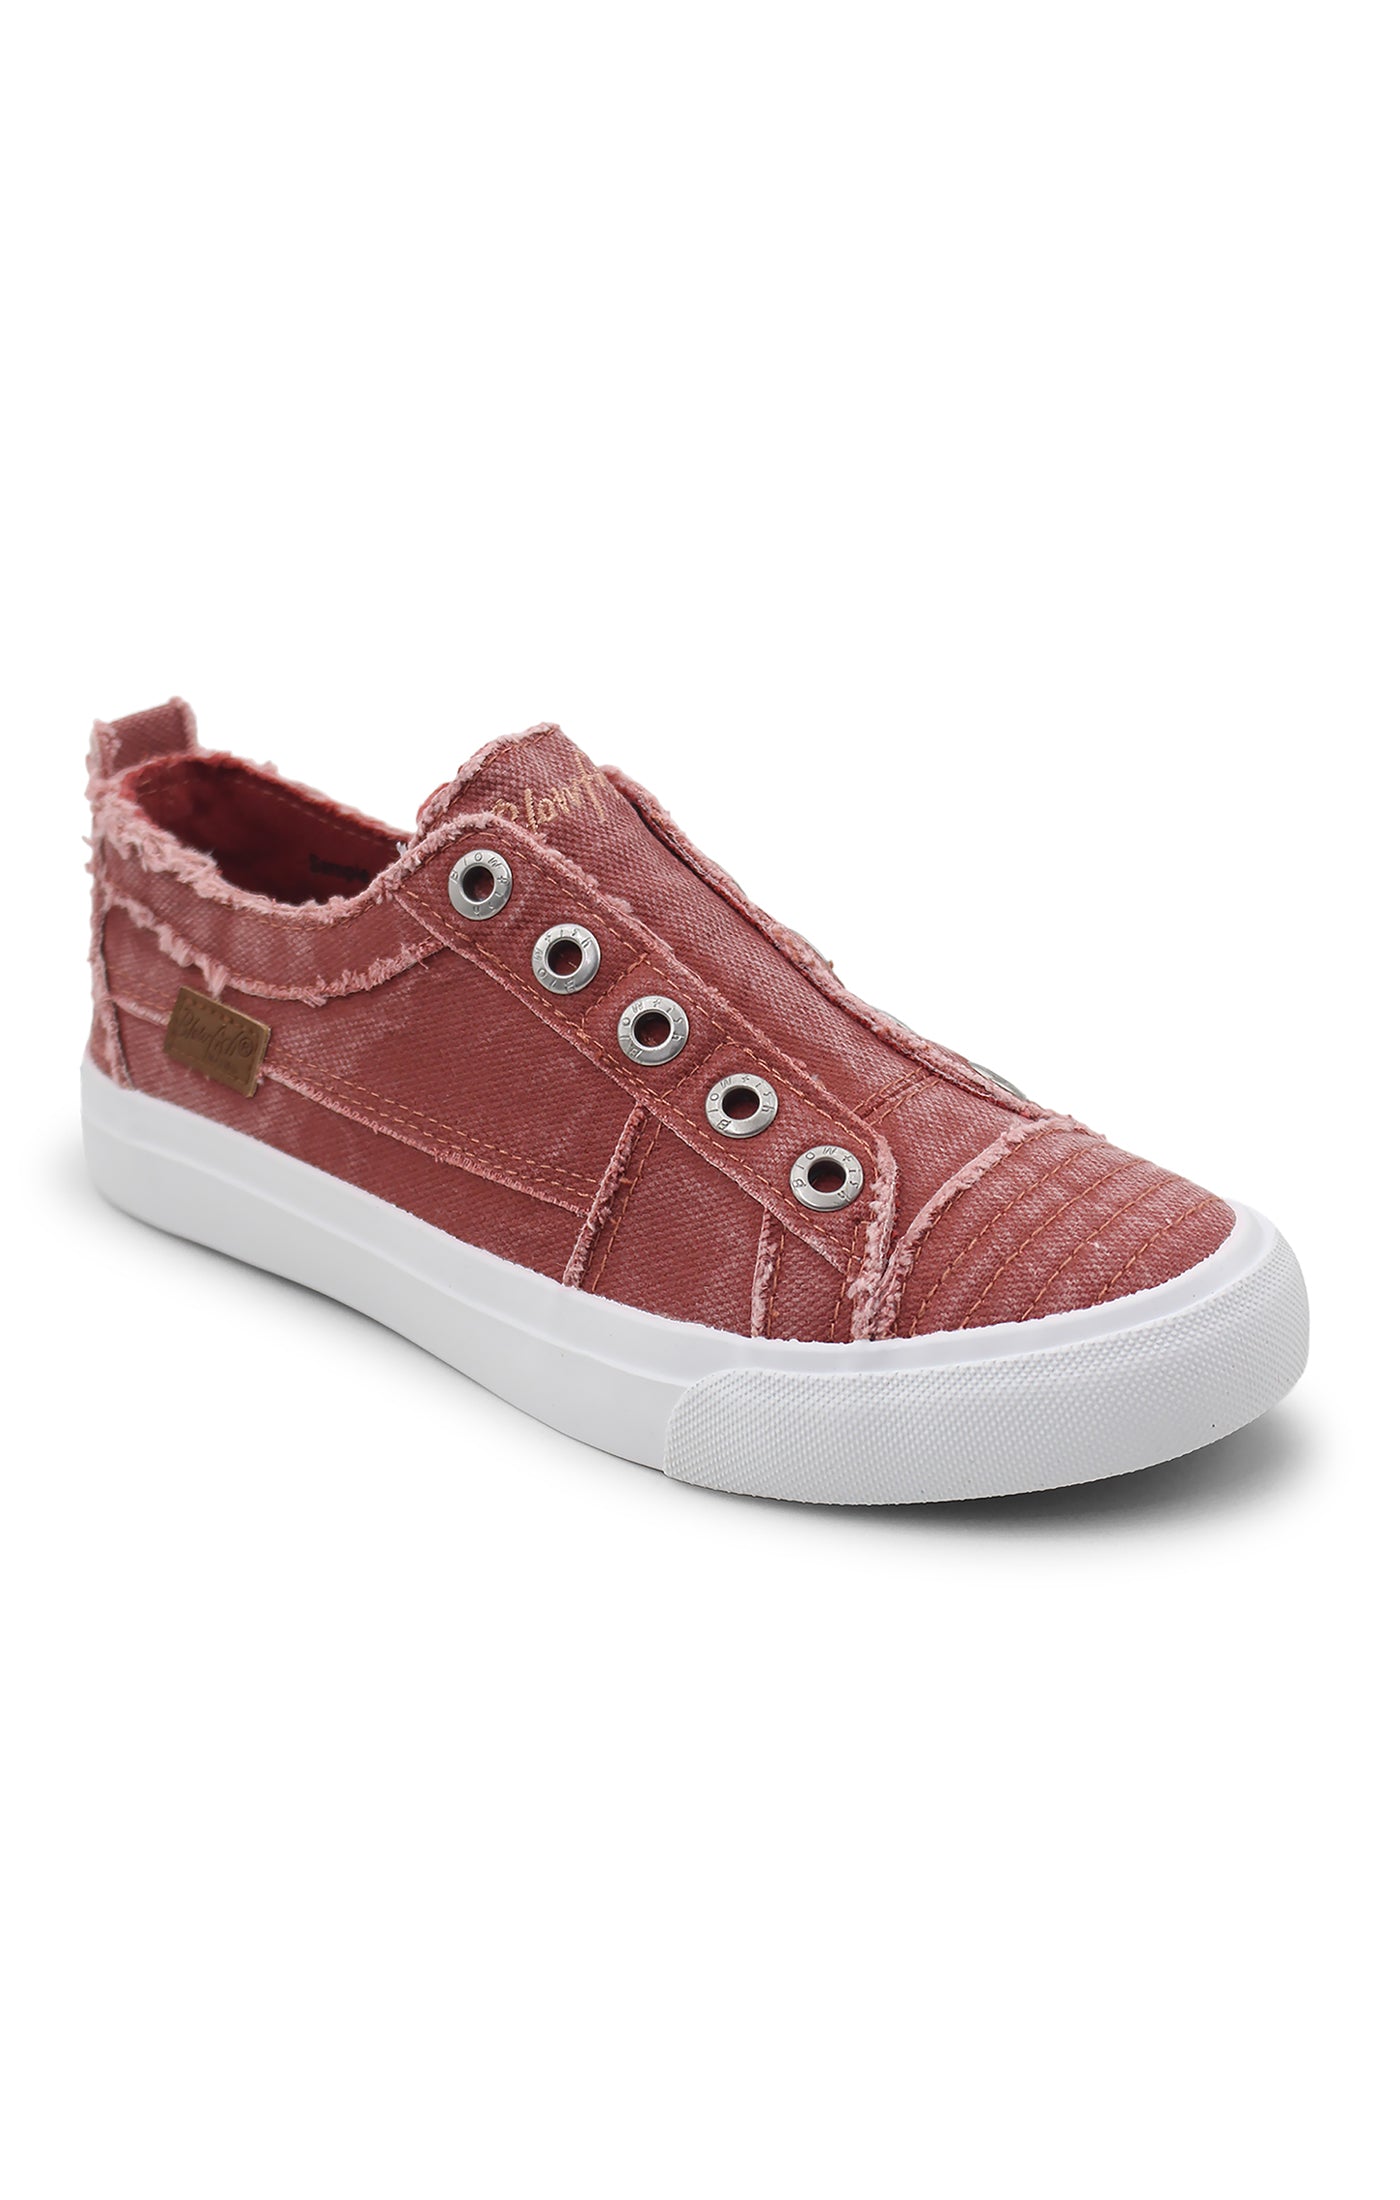 Blowfish Play Sneakers in Baked Clay    Shoes Blowfish Malibu- Tilden Co.